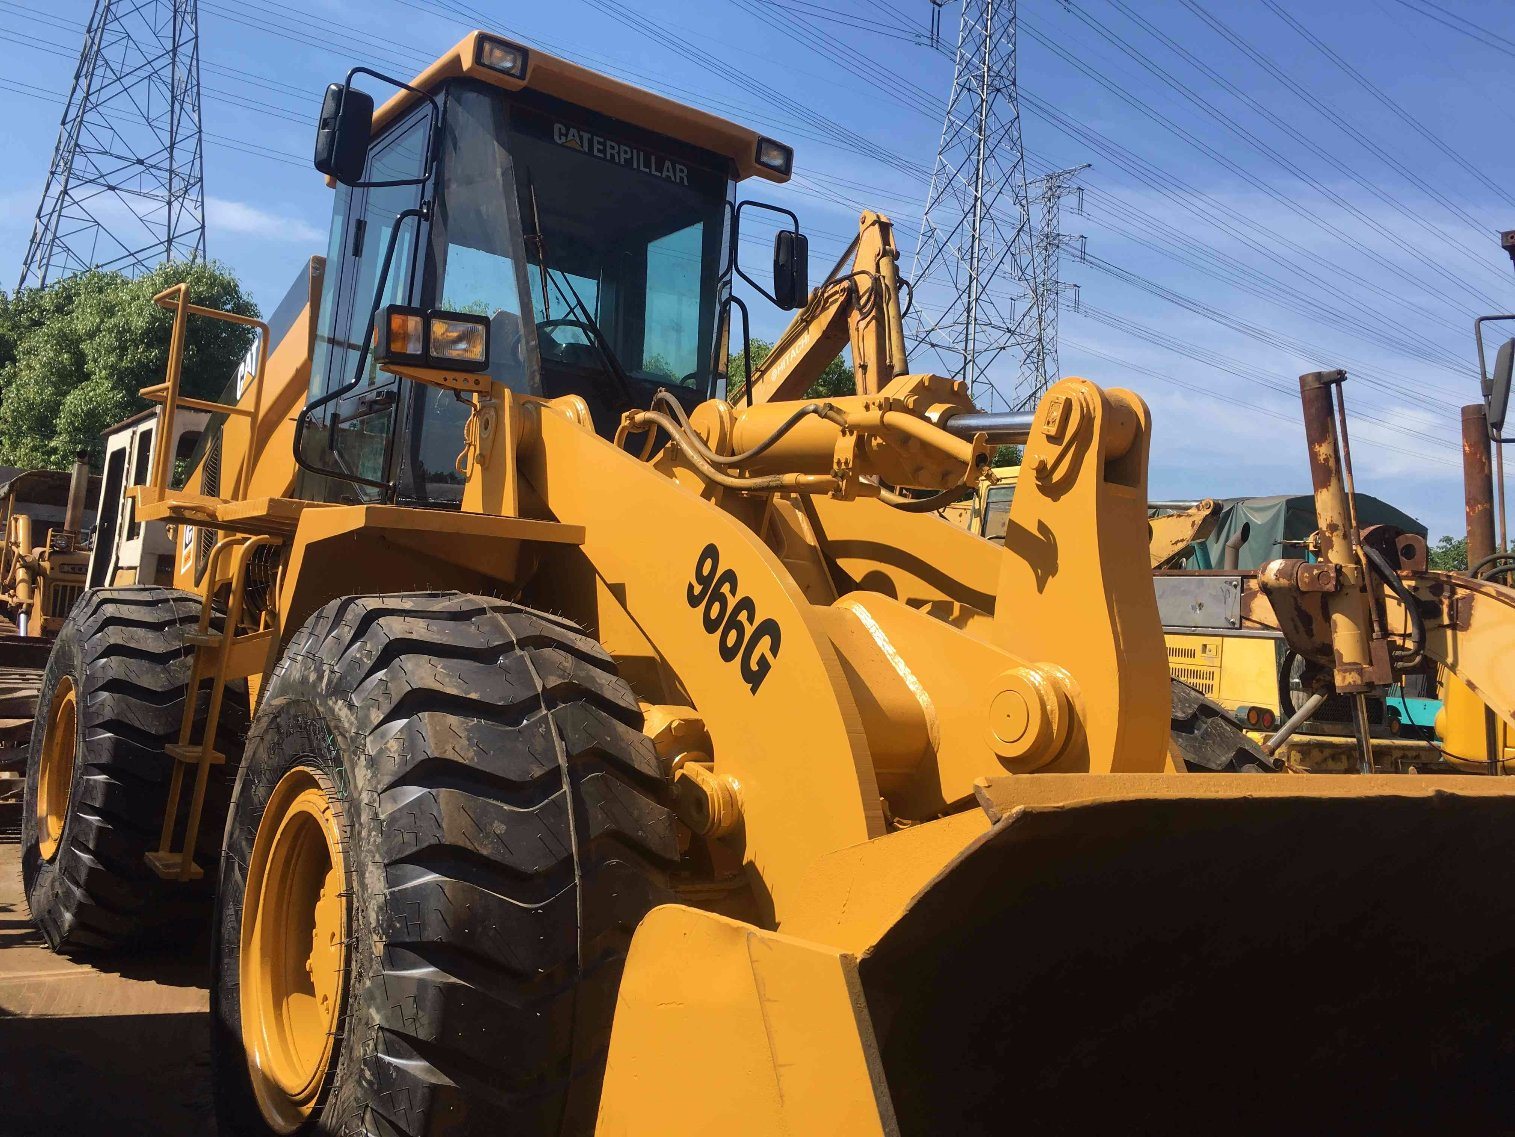 
                Used Wheel Loader Cat 966g in Hot Sale, Secondhand Loader Caterpillar 966g with Good Conditioan
            